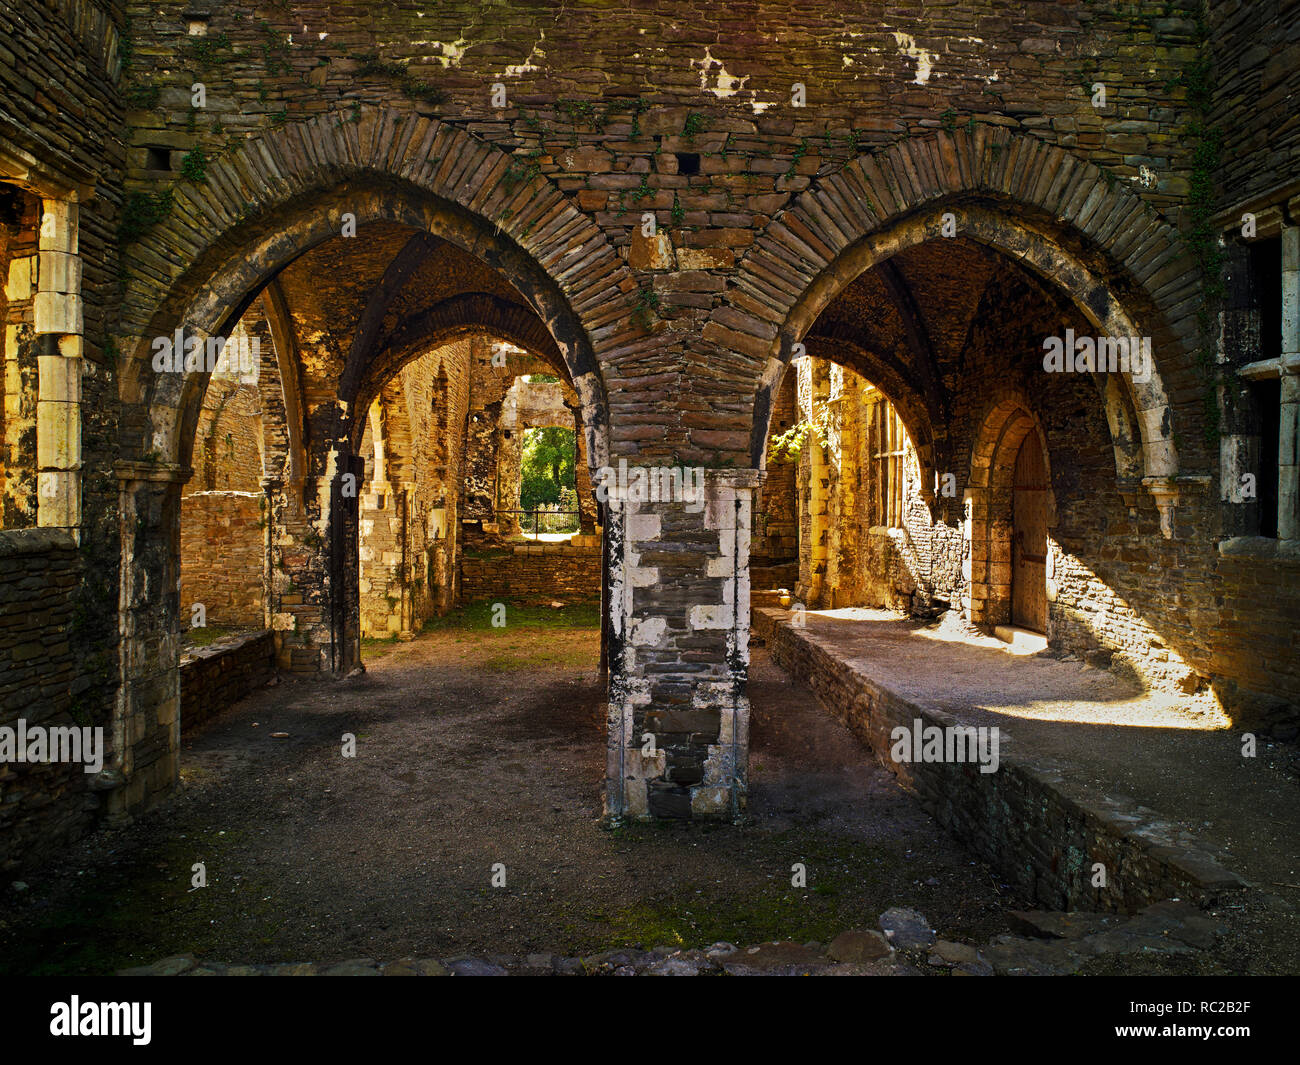 A sunlit view of part of the ruins of the historic Neath Abbey, Wales, UK Stock Photo